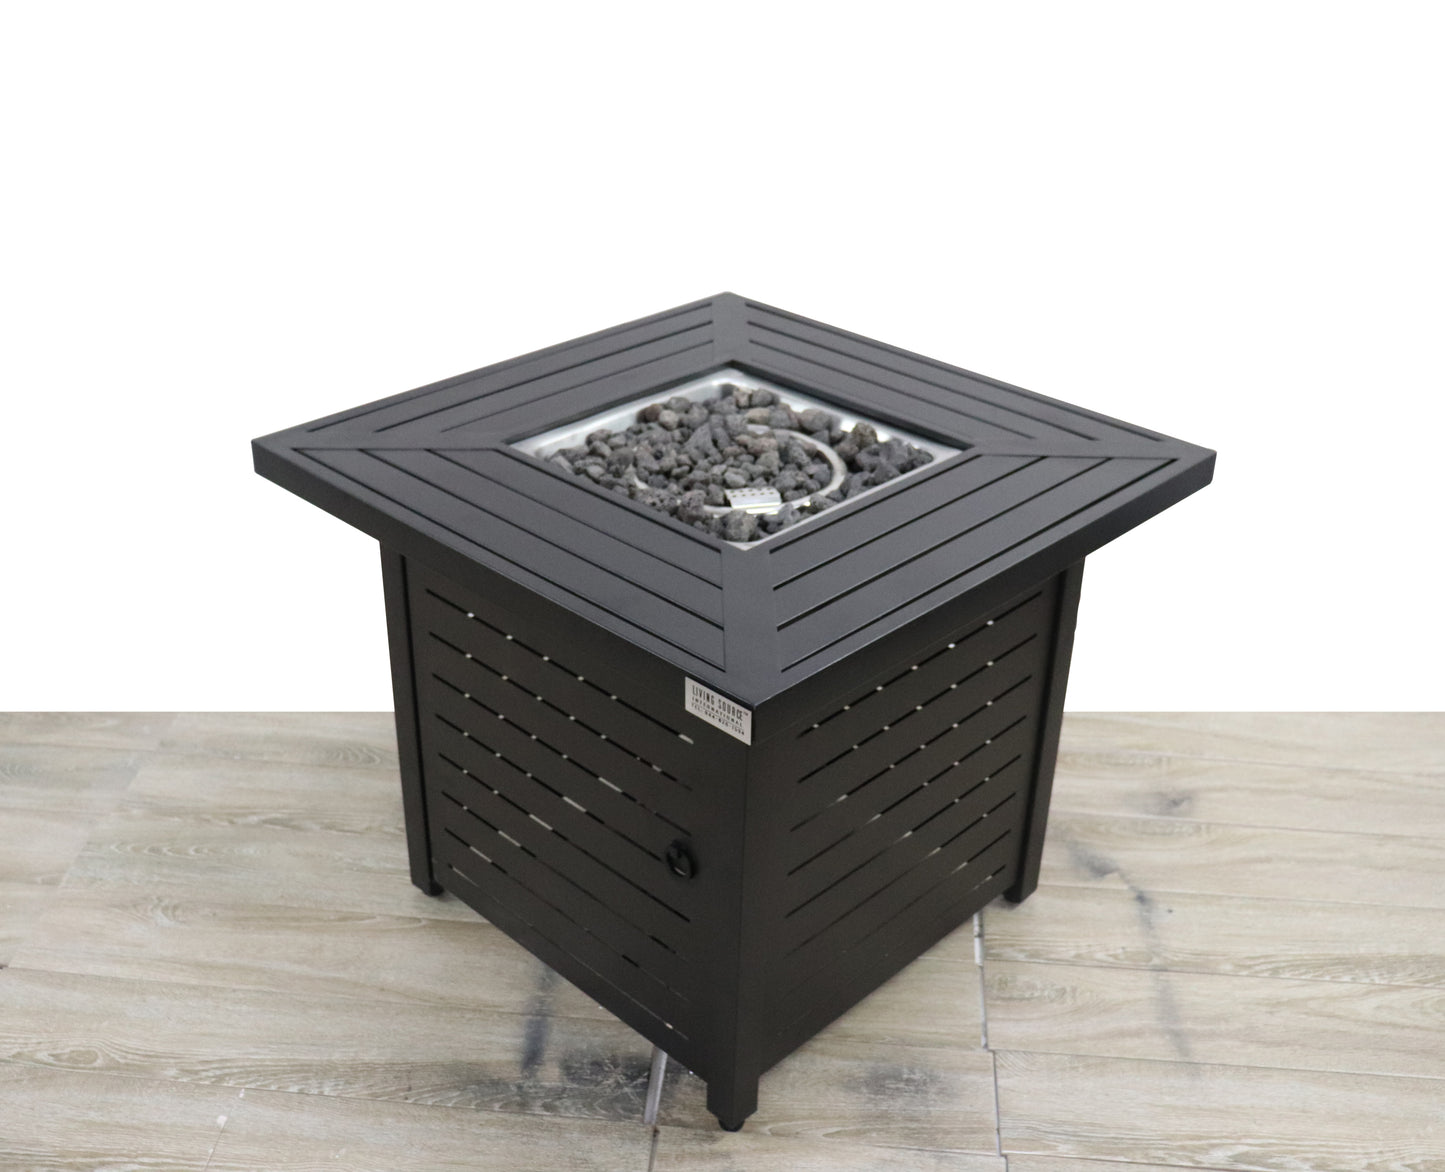 Steel Outdoor Fire Pit Table with Adjustable Flame - 30 x 30